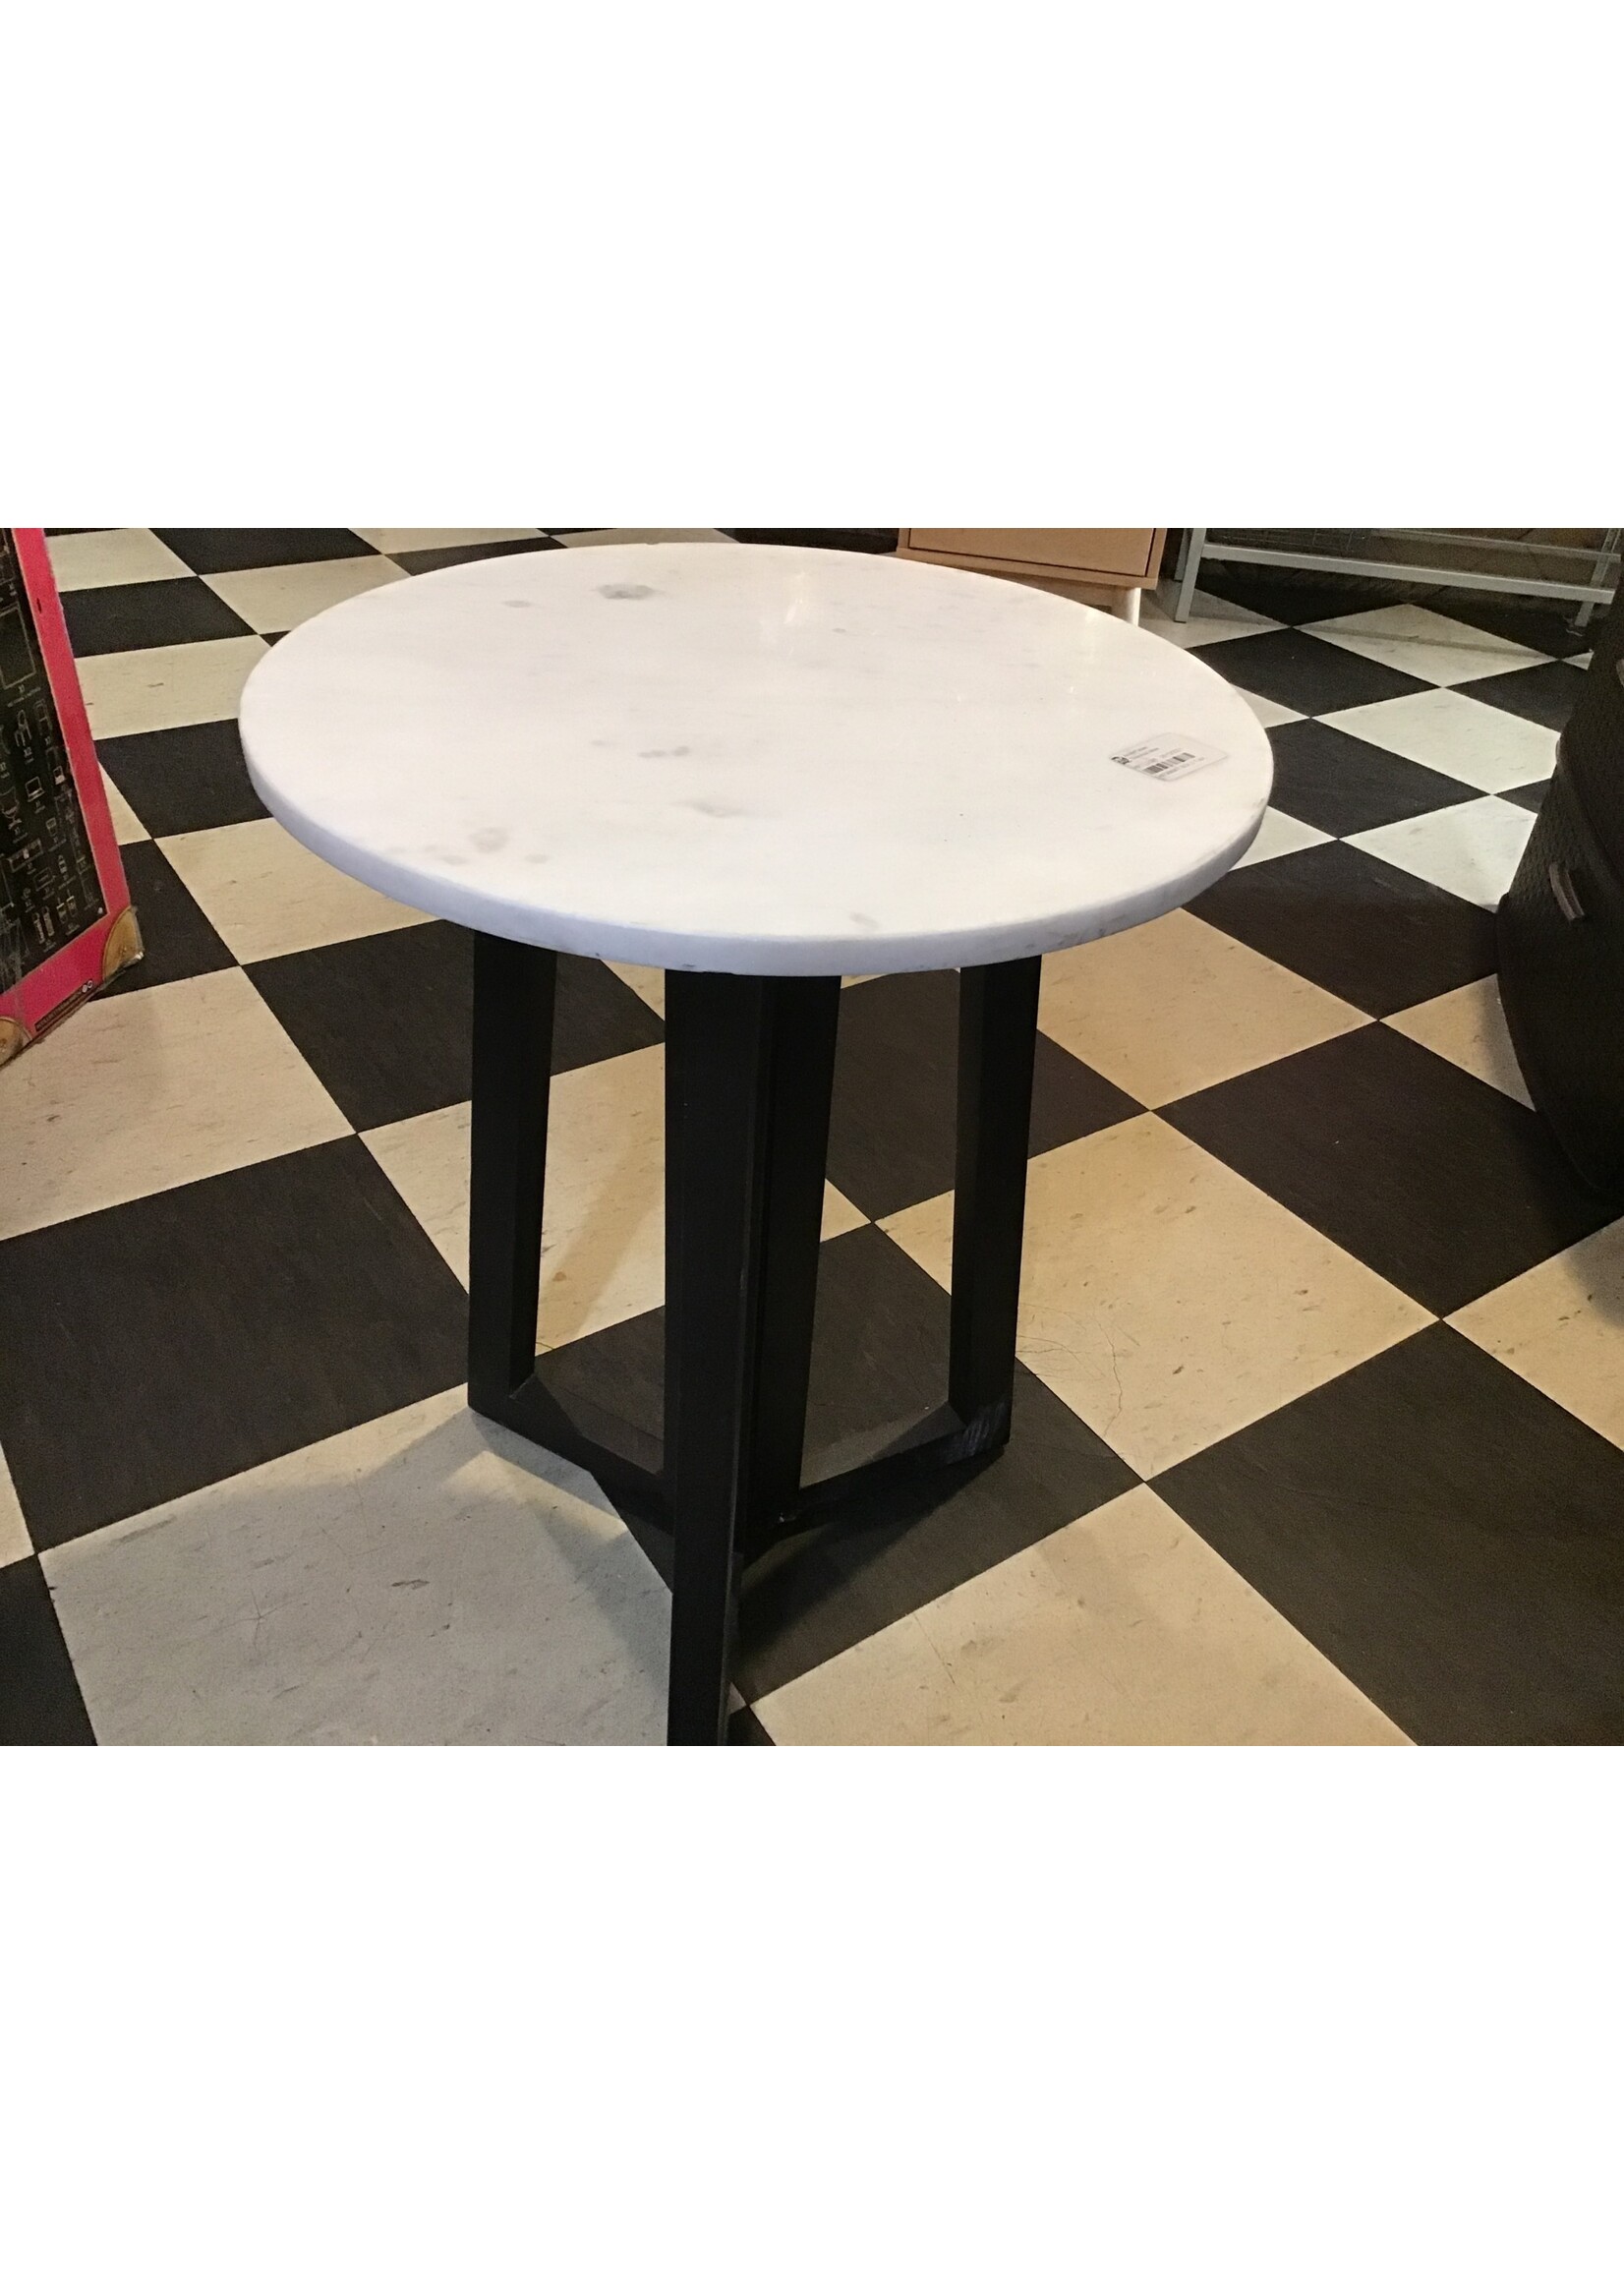 16” Threshold accent table white 21 high